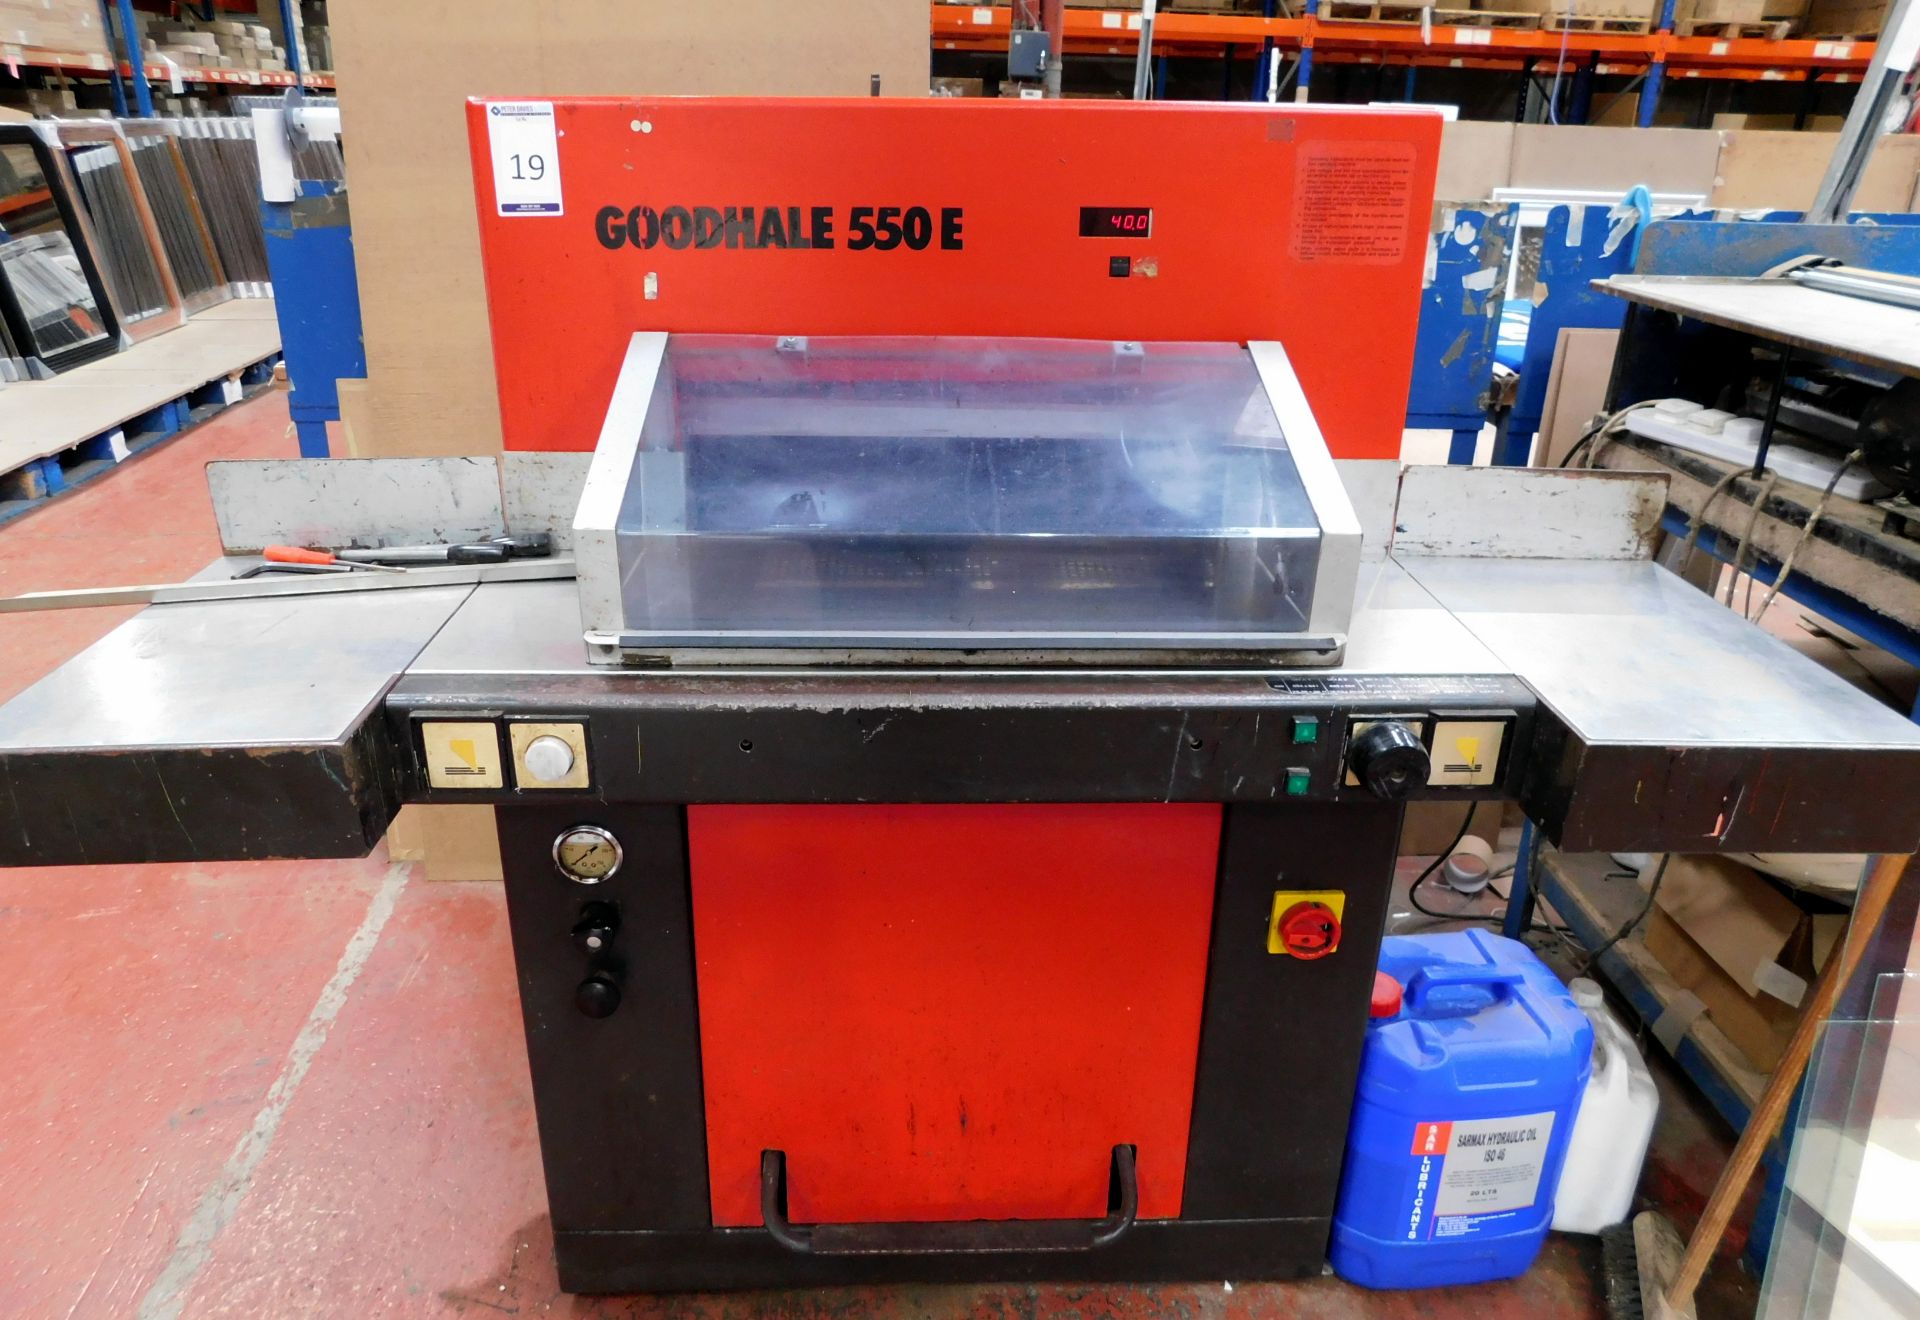 Goodhale Multi Cut 10/550E 120bar Guillotine, 240v (Collection – Friday 25th, Tuesday 29th or